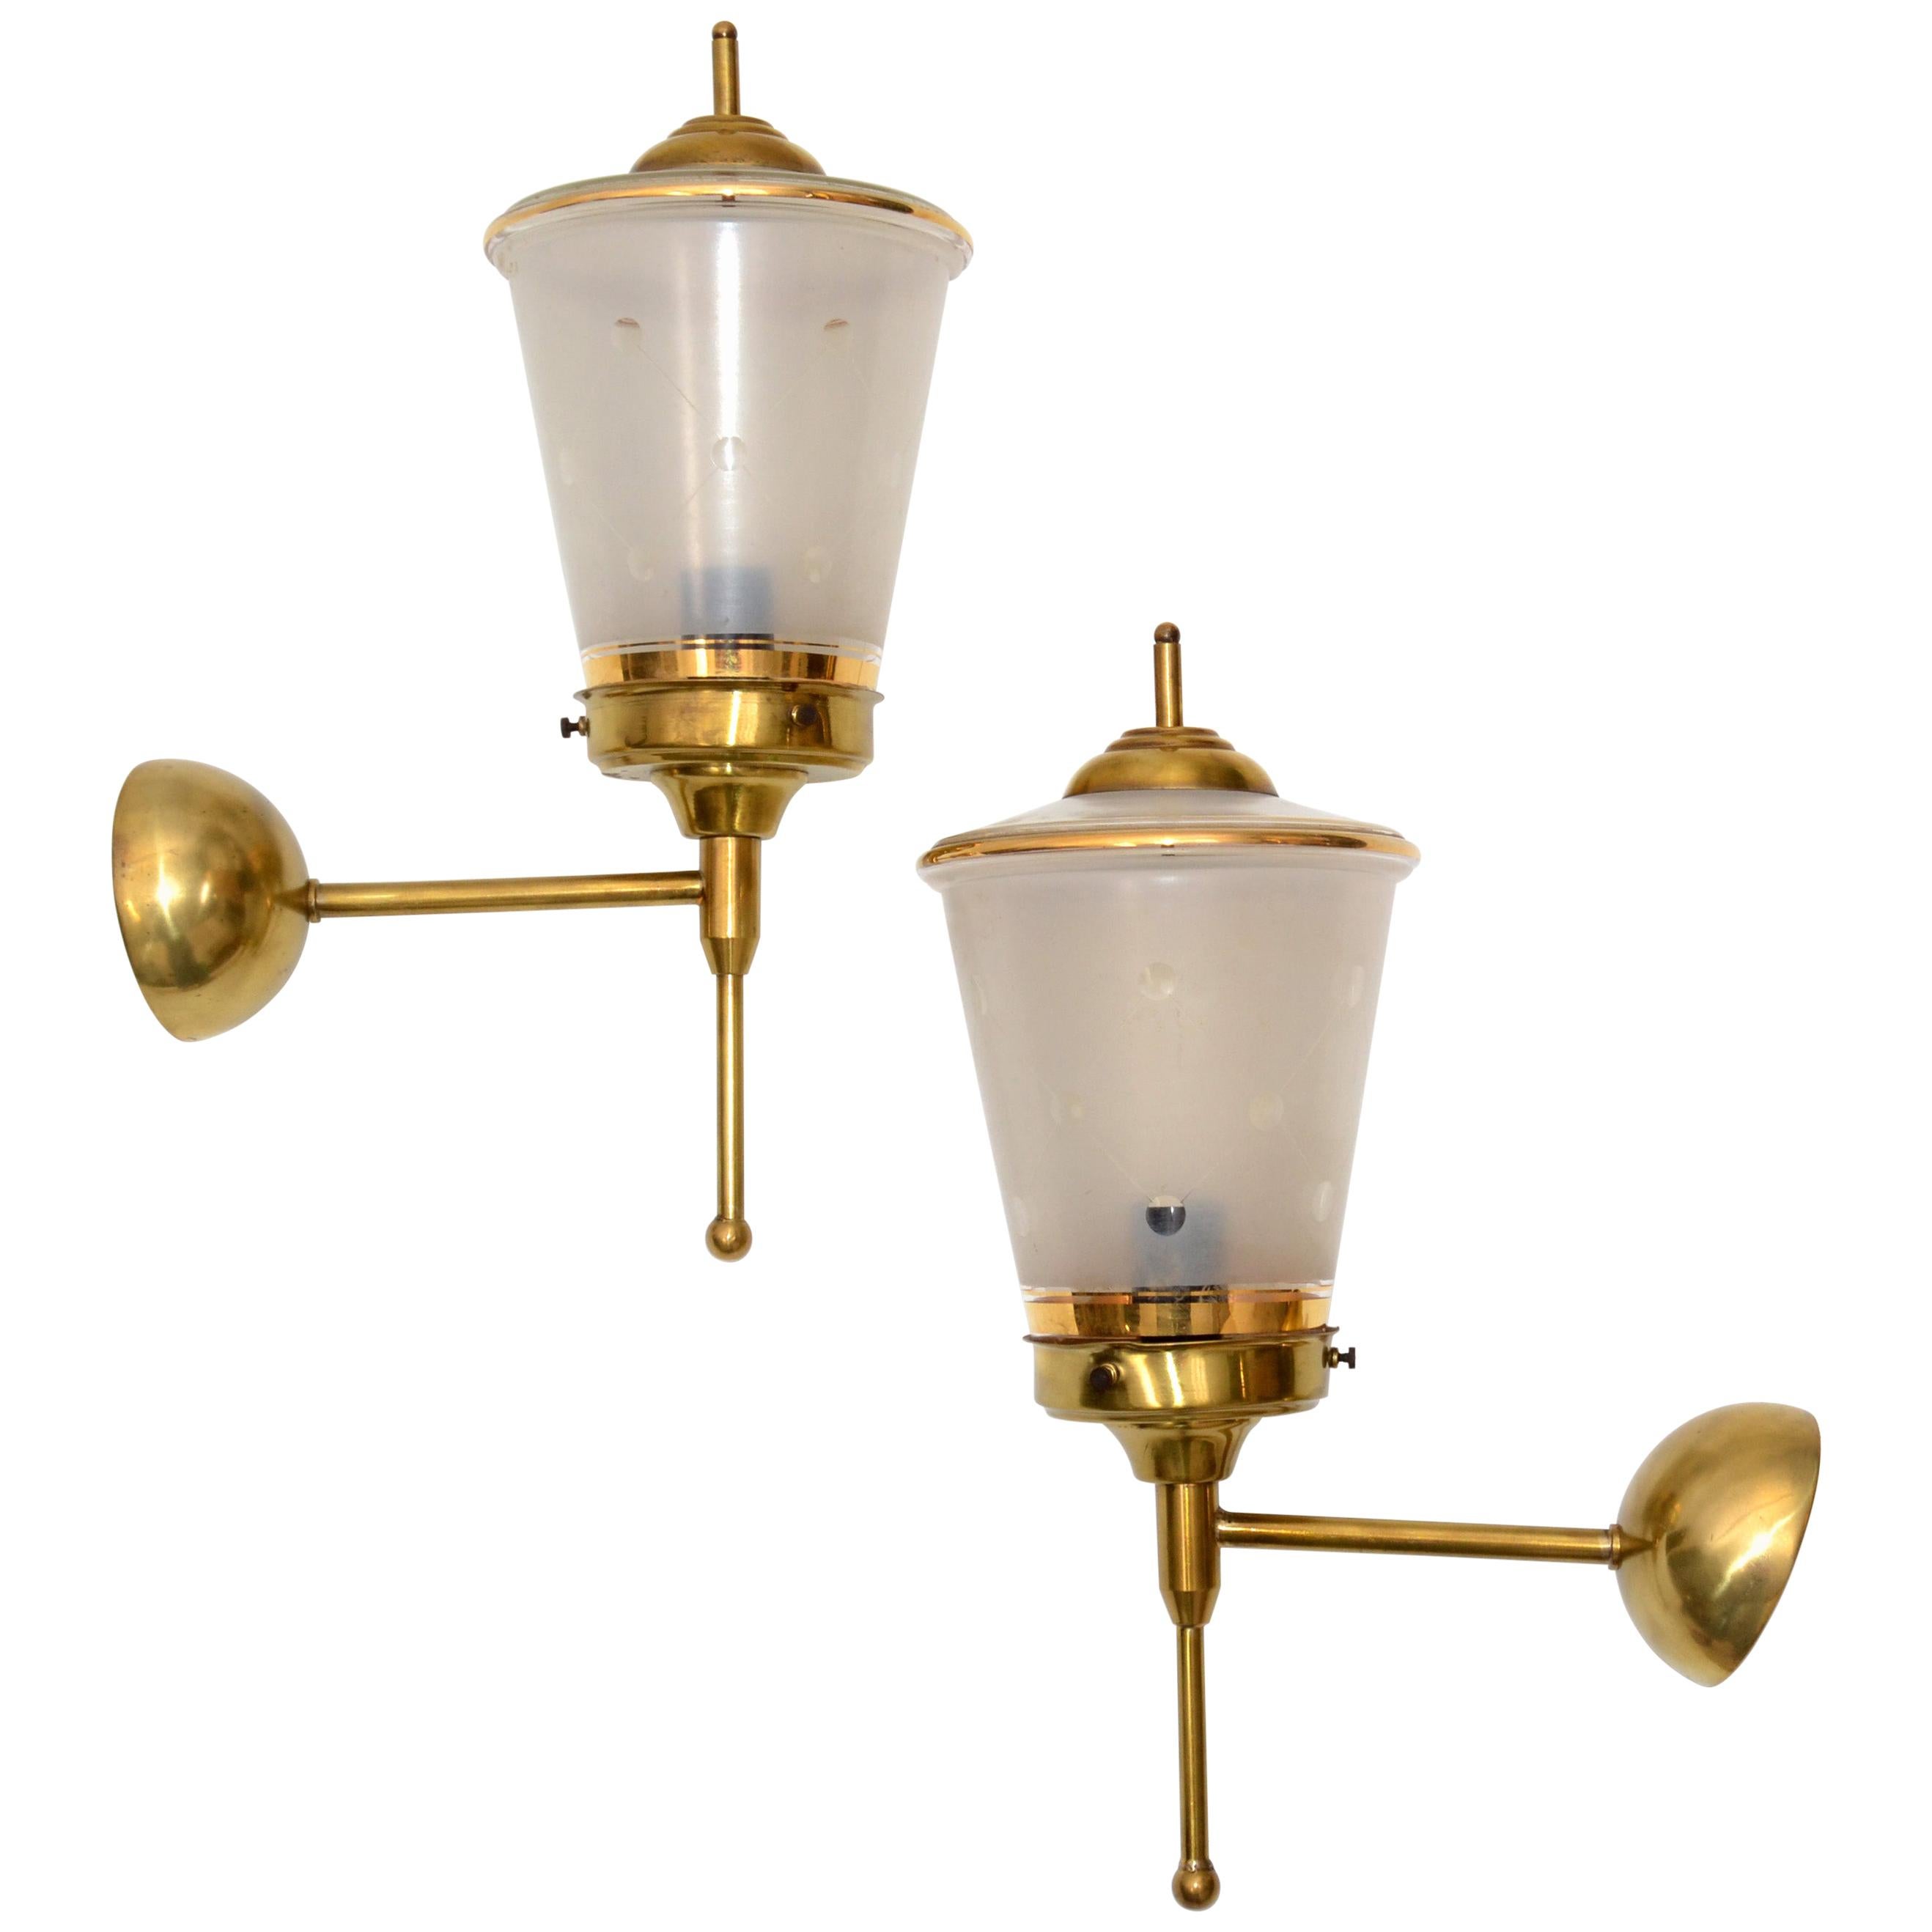 Maison Lunel Pair of Ornate Glass and Brass Lantern Wall Mounted Sconces, France For Sale